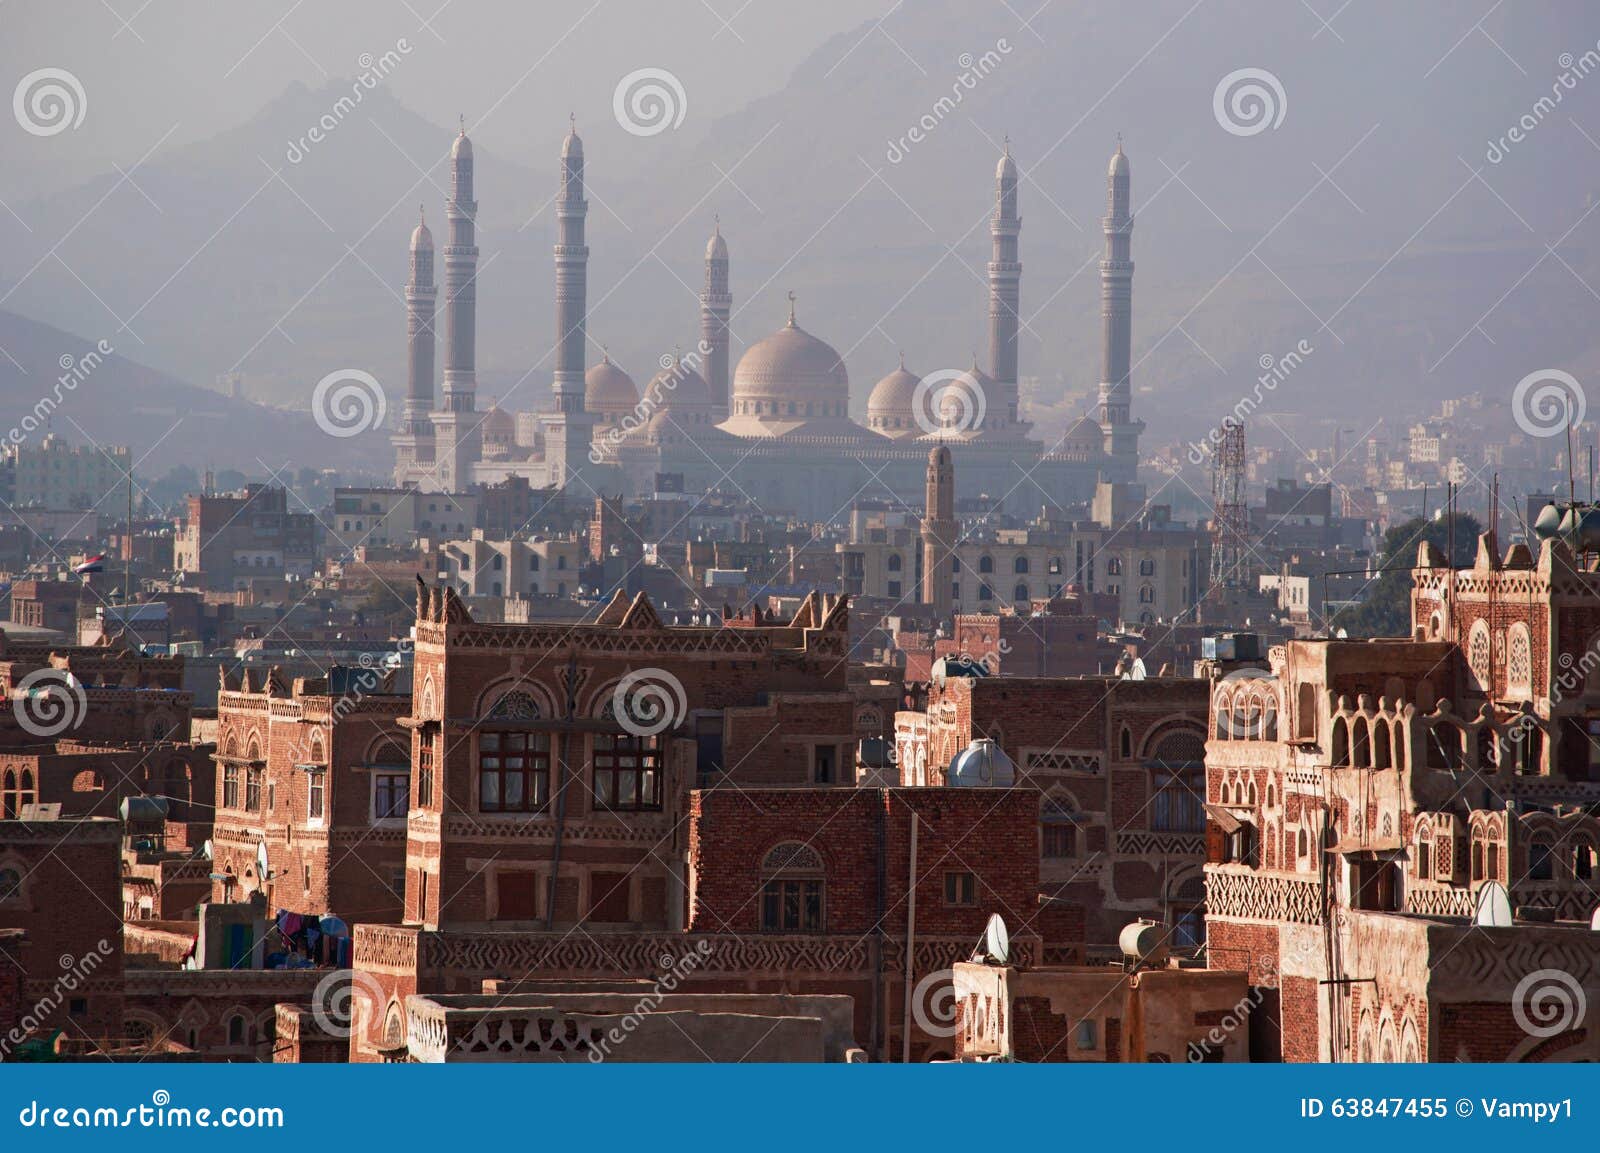 sana'a, old city, decorated houses, palace, minaret, mosque, yemen, middle east, skyline